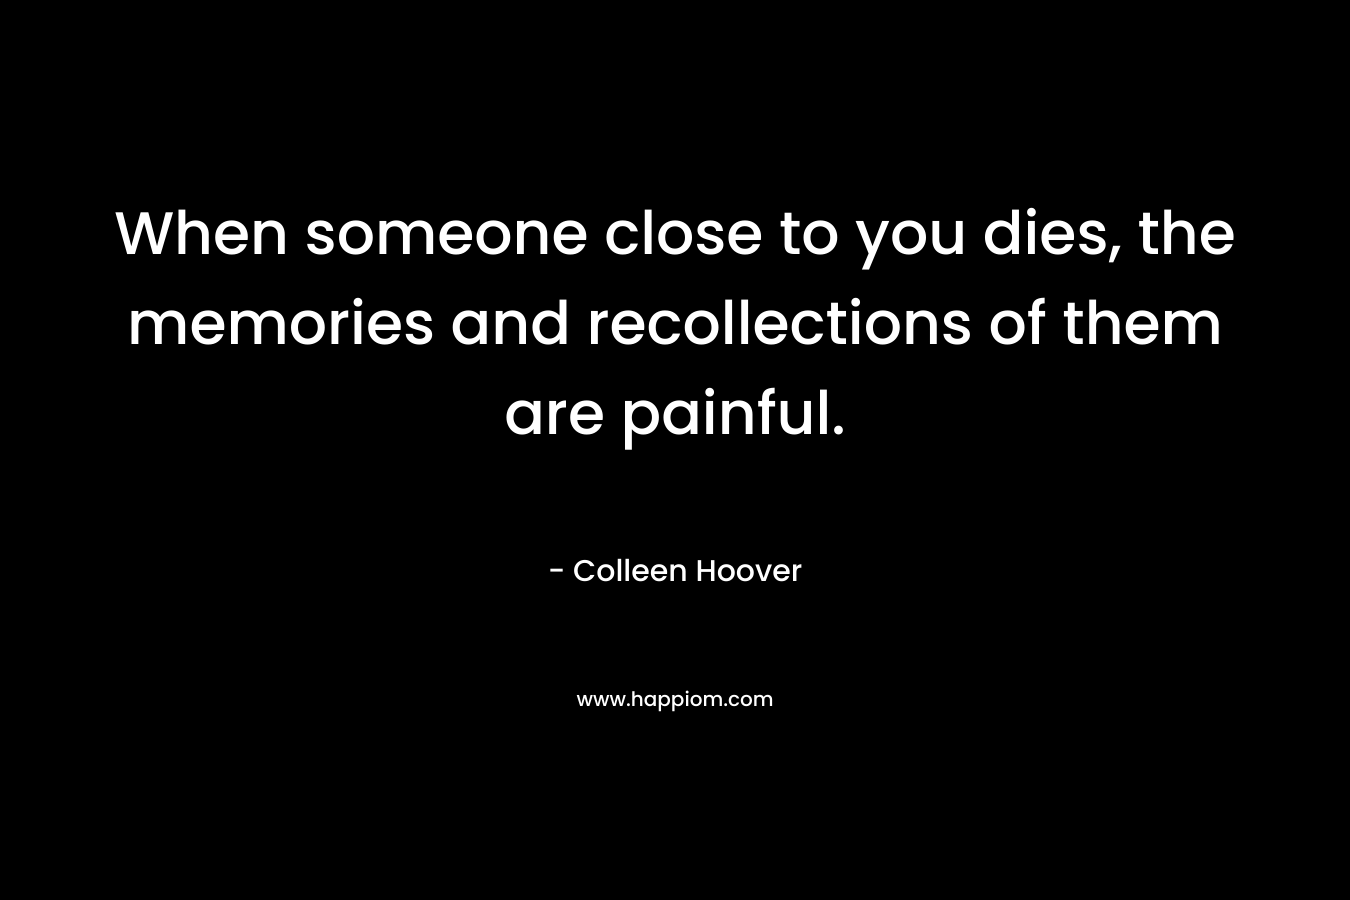 When someone close to you dies, the memories and recollections of them are painful. – Colleen Hoover